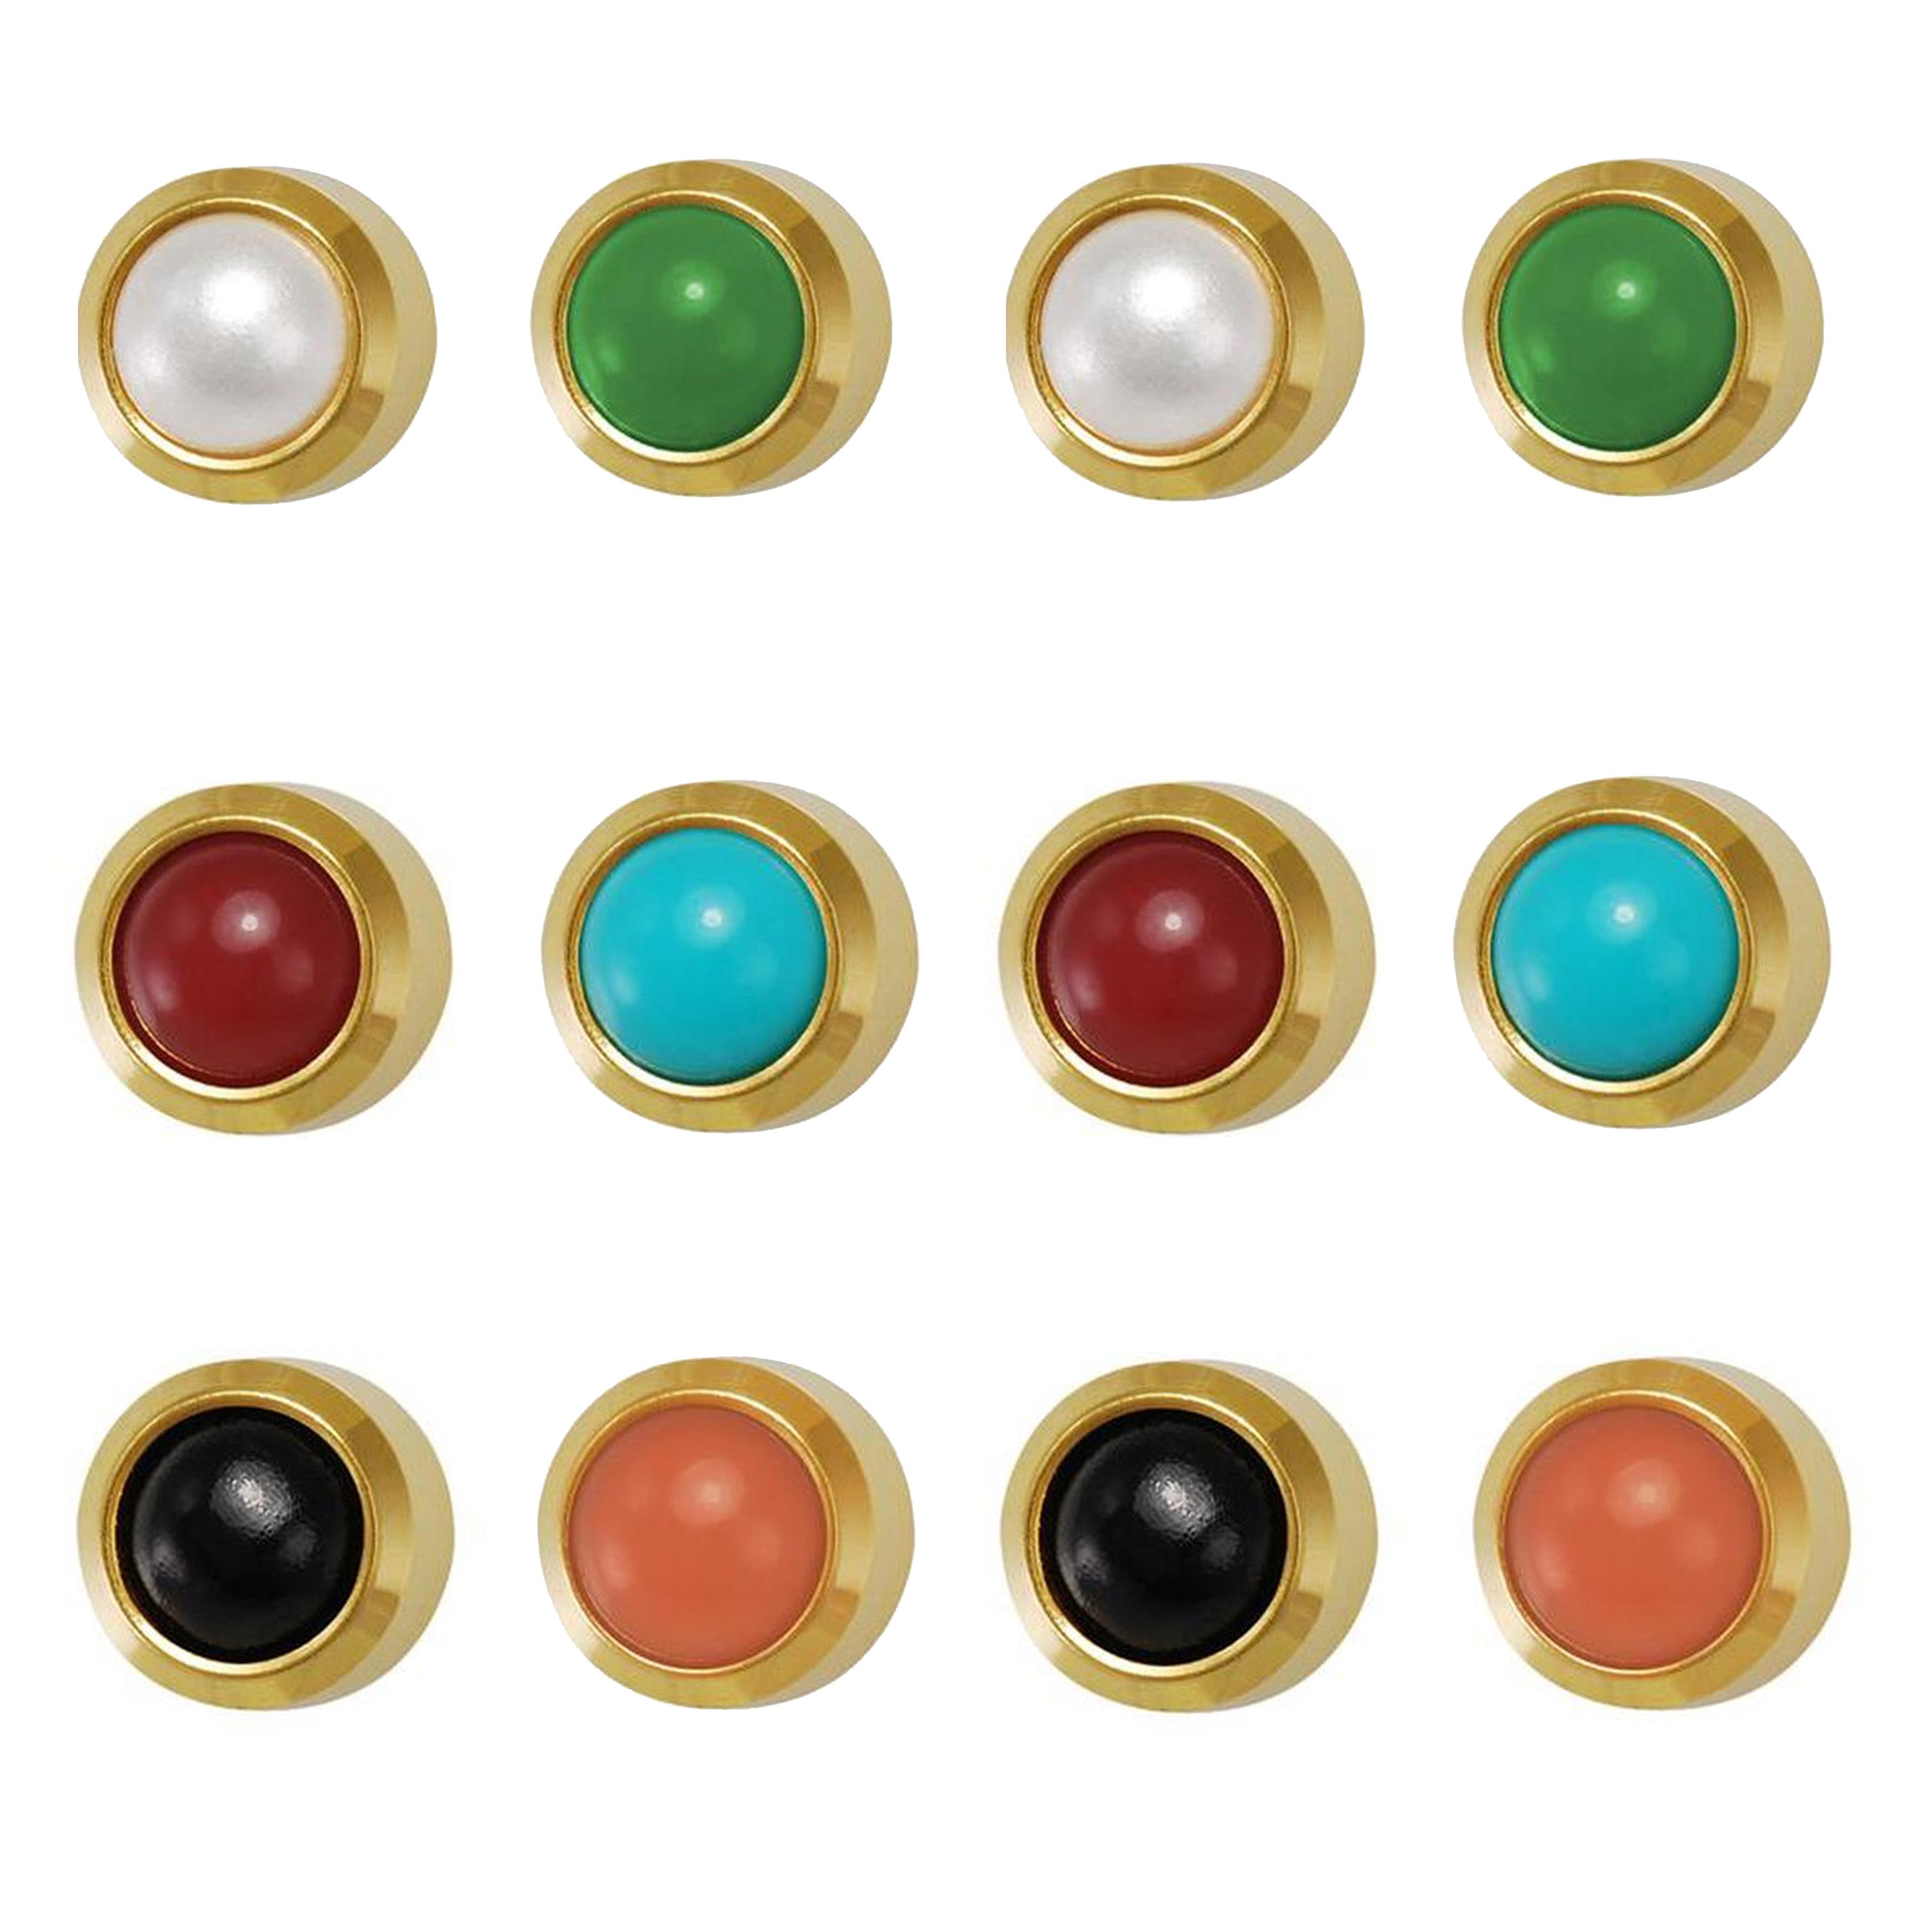 3MM Assorted Pearls 24K Pure Gold Plated Piercing Ear Stud (12 Pair)